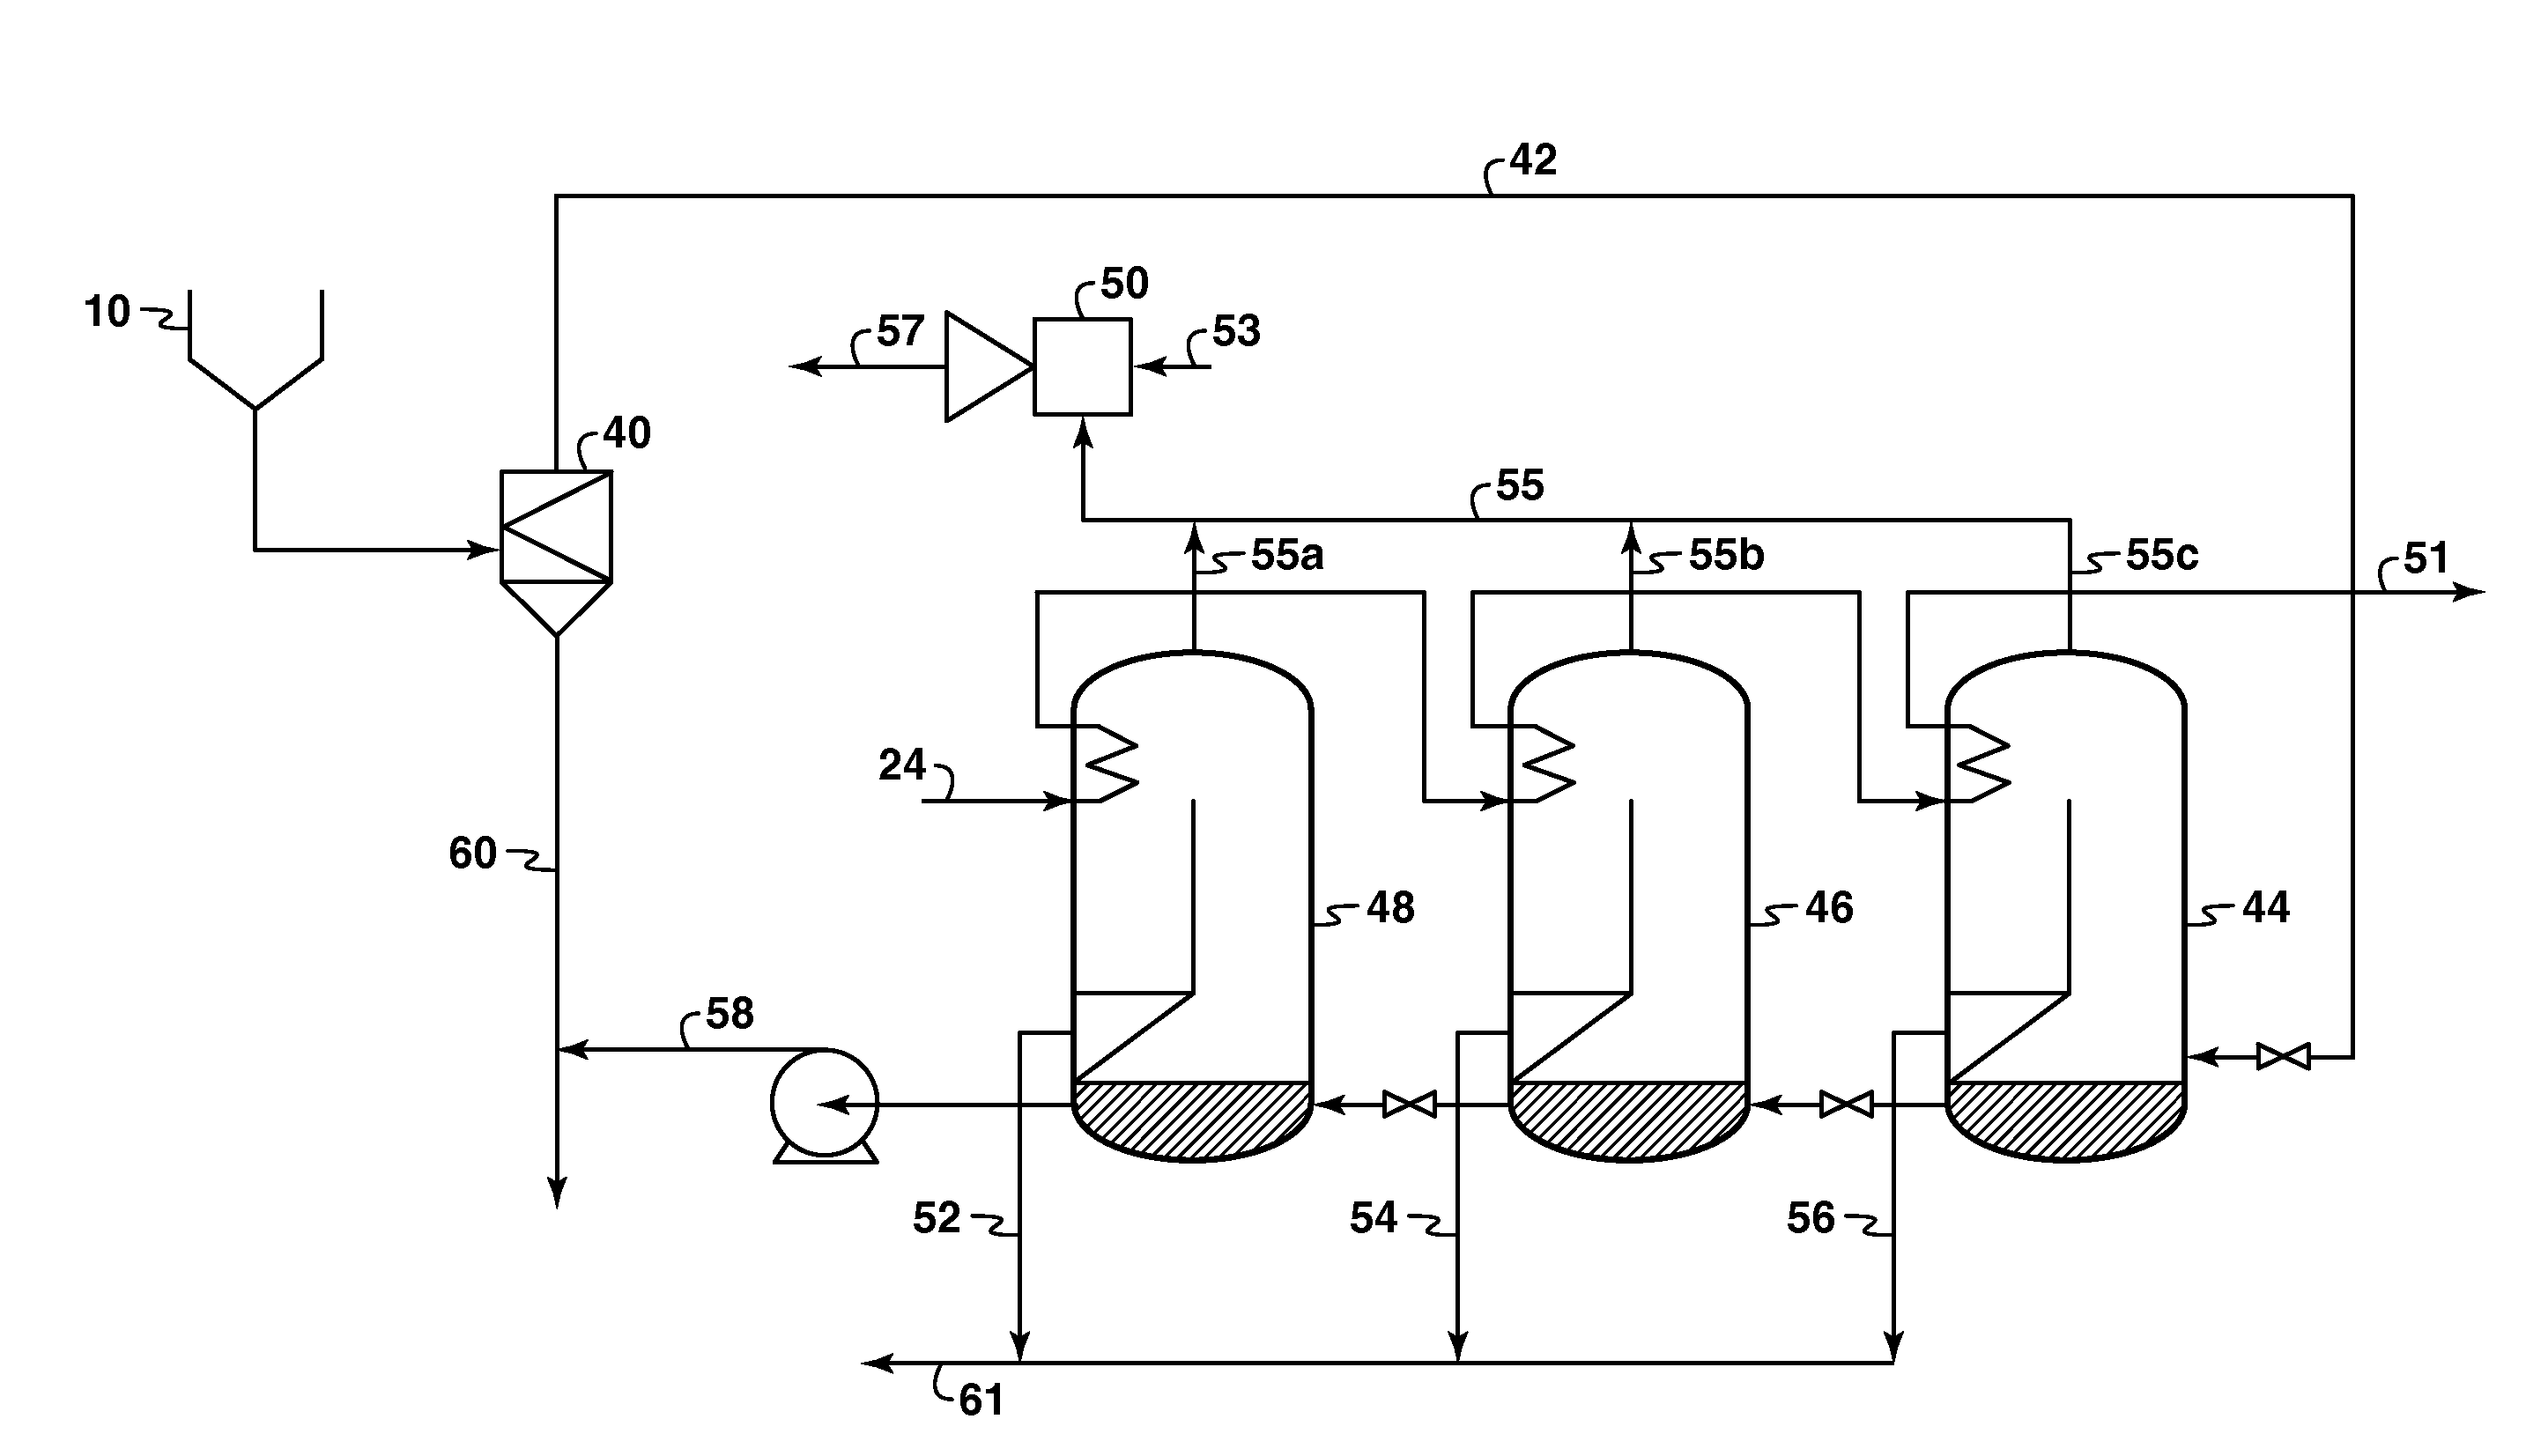 System and method of recovering heat and water and generating power from bitumen mining operations